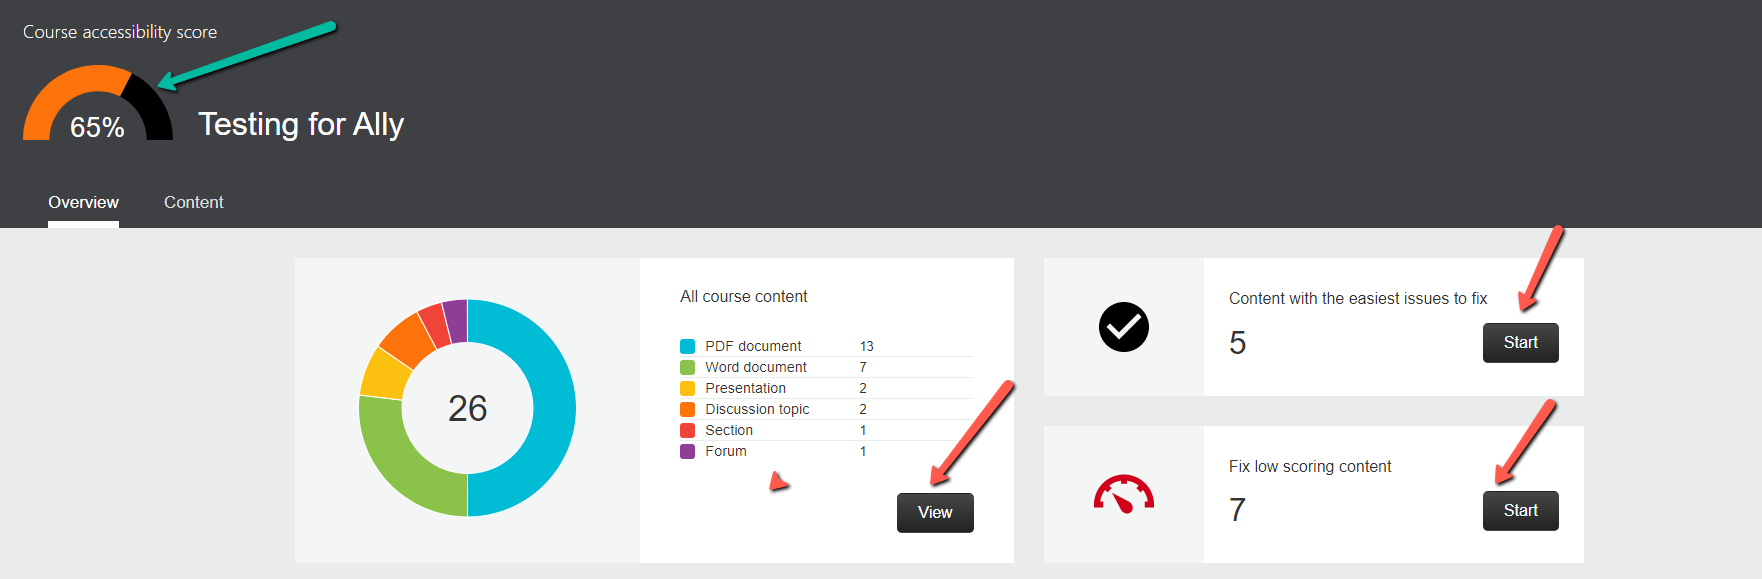 The course accessibility report displays the overall accessibility score, the link to view all course issues, a link to view content with the easiest issues to fix and a link to fix low scoring content